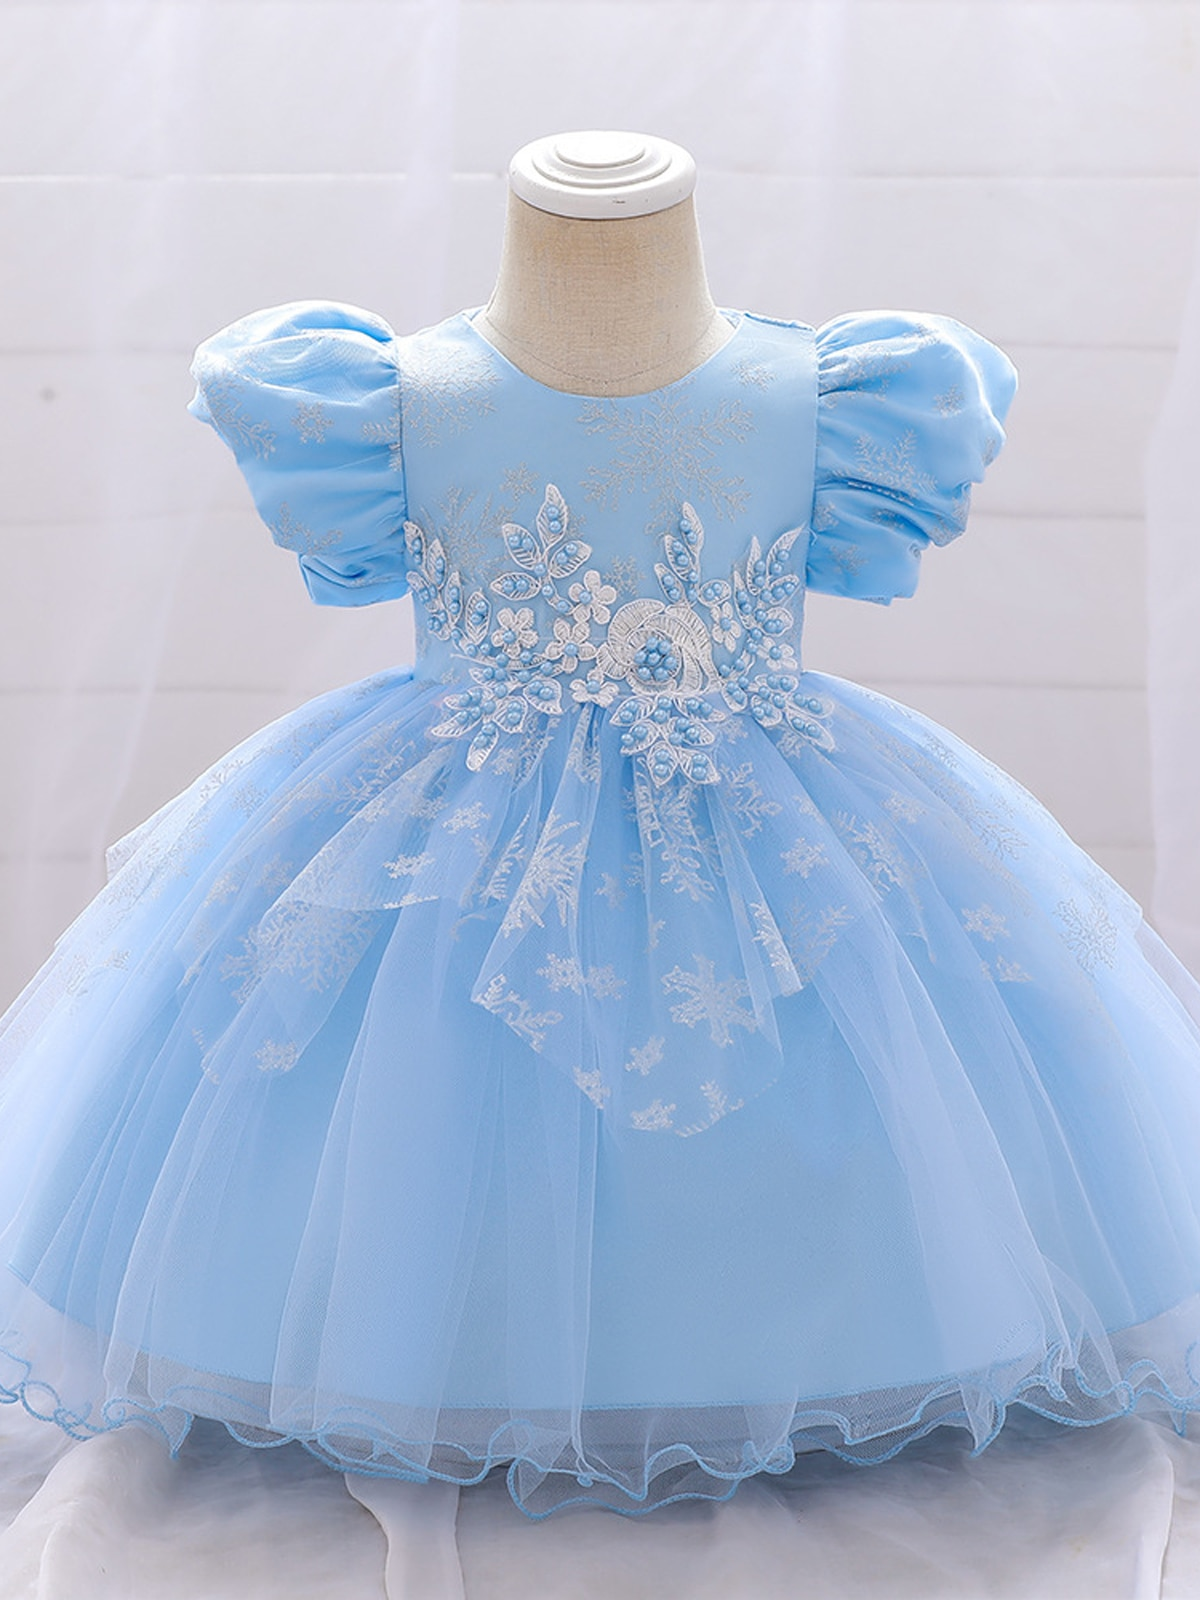 Girls Winter Holiday Dress | Toddlers Sparkle Lace Princess Dress